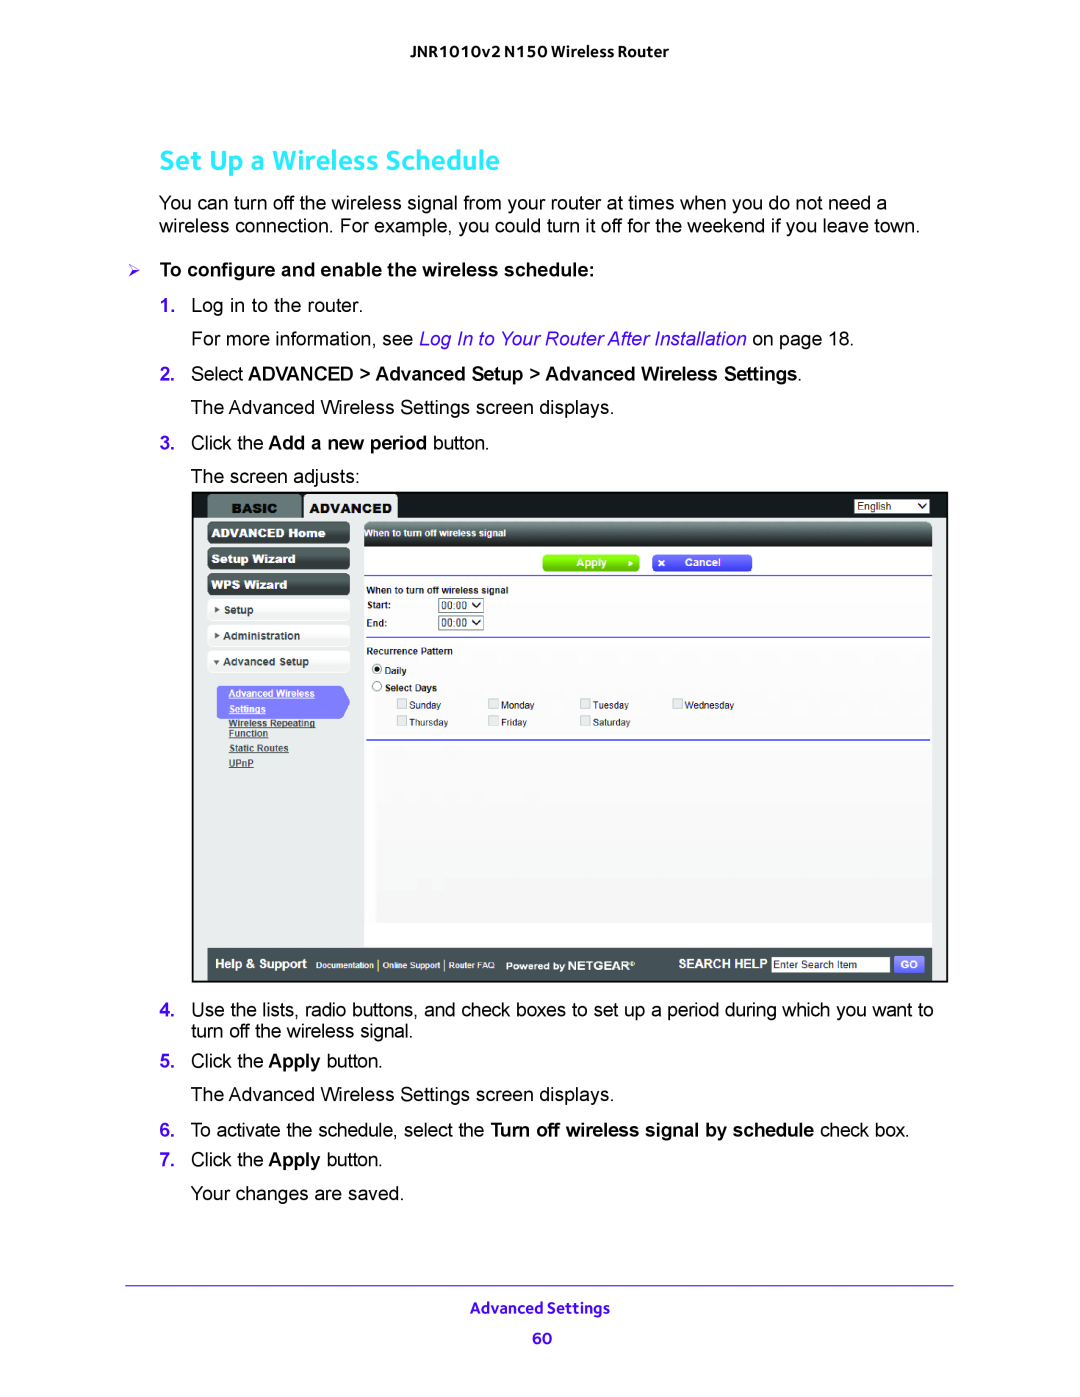 NETGEAR JNR1010V2 user manual Set Up a Wireless Schedule,  To configure and enable the wireless schedule 